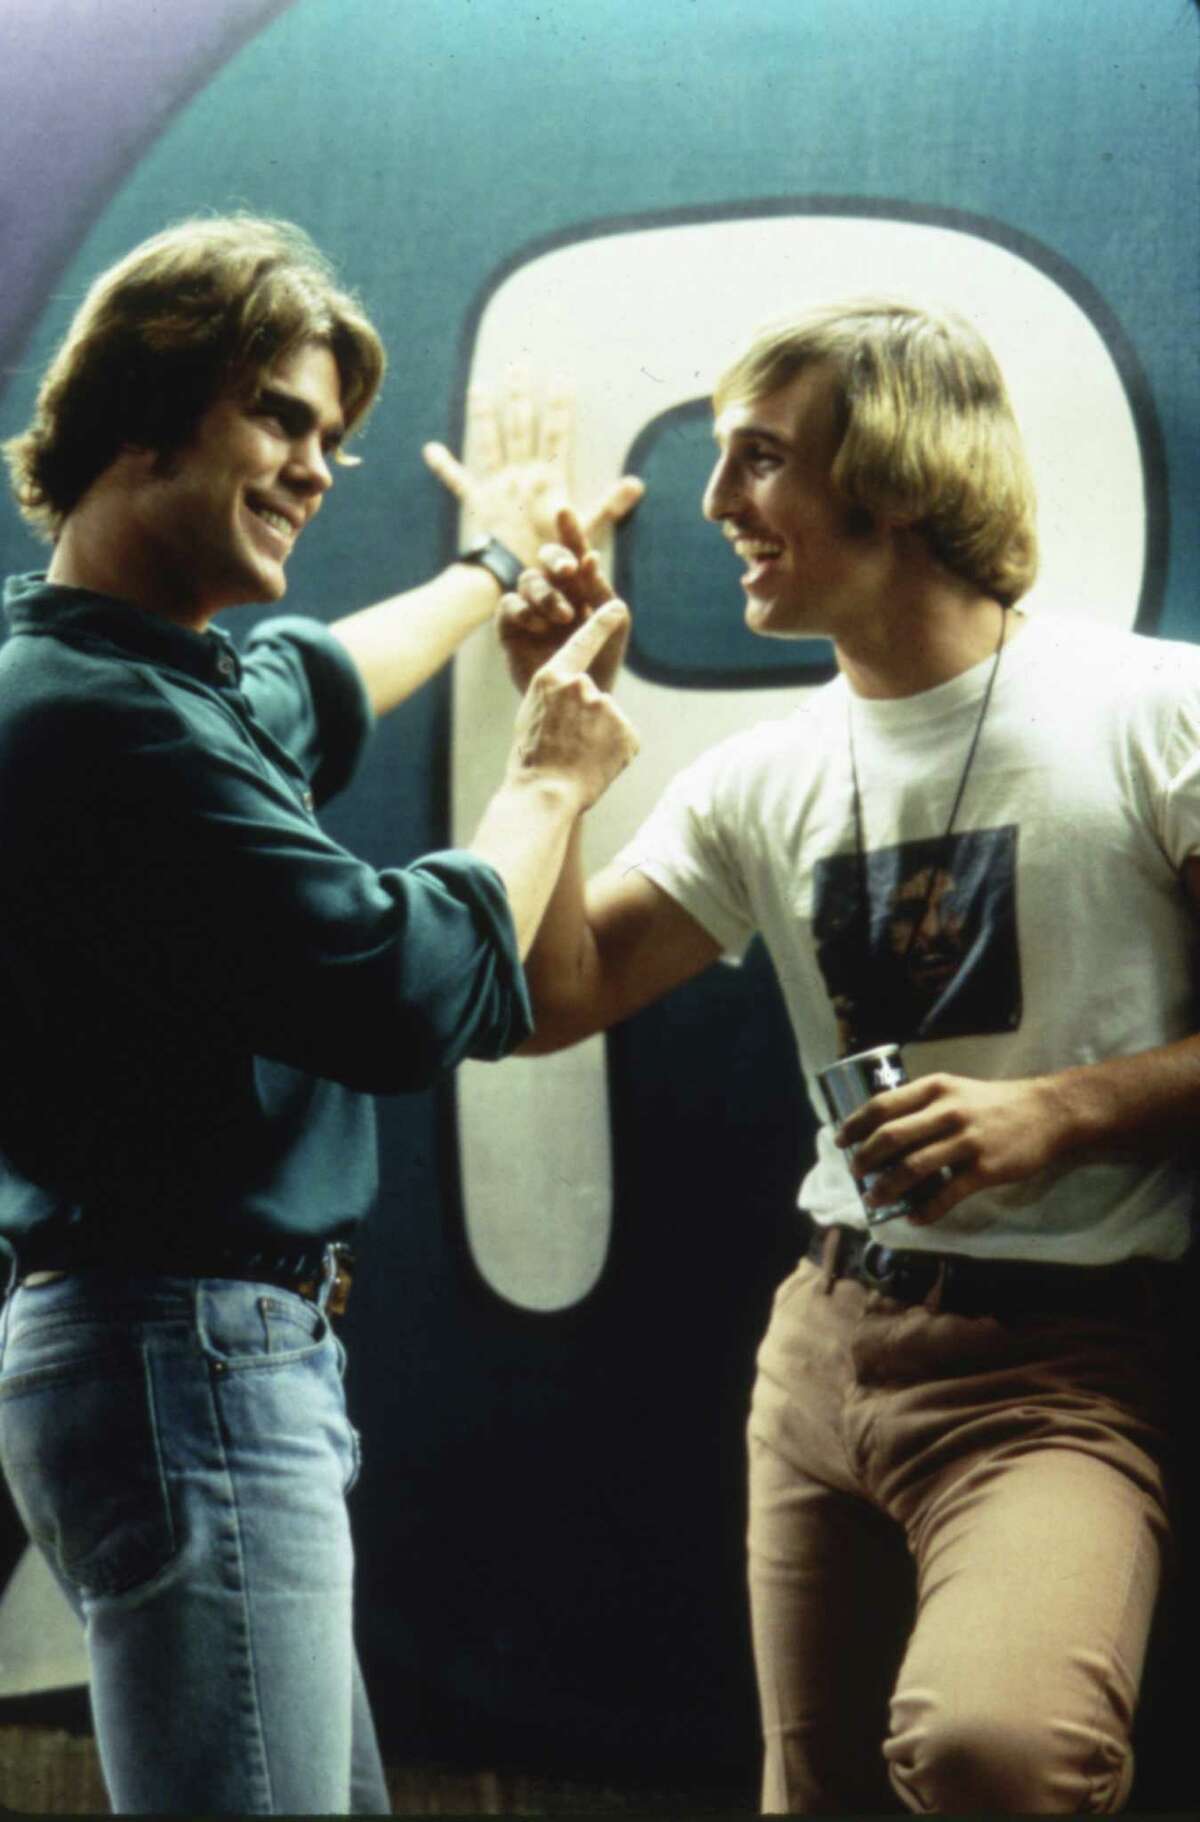 'Dazed and Confused' (1993)  Wooderson: Let me tell you this, the older you do get the more rules they're gonna try to get you to follow. You just gotta keep livin' man, L-I-V-I-N.